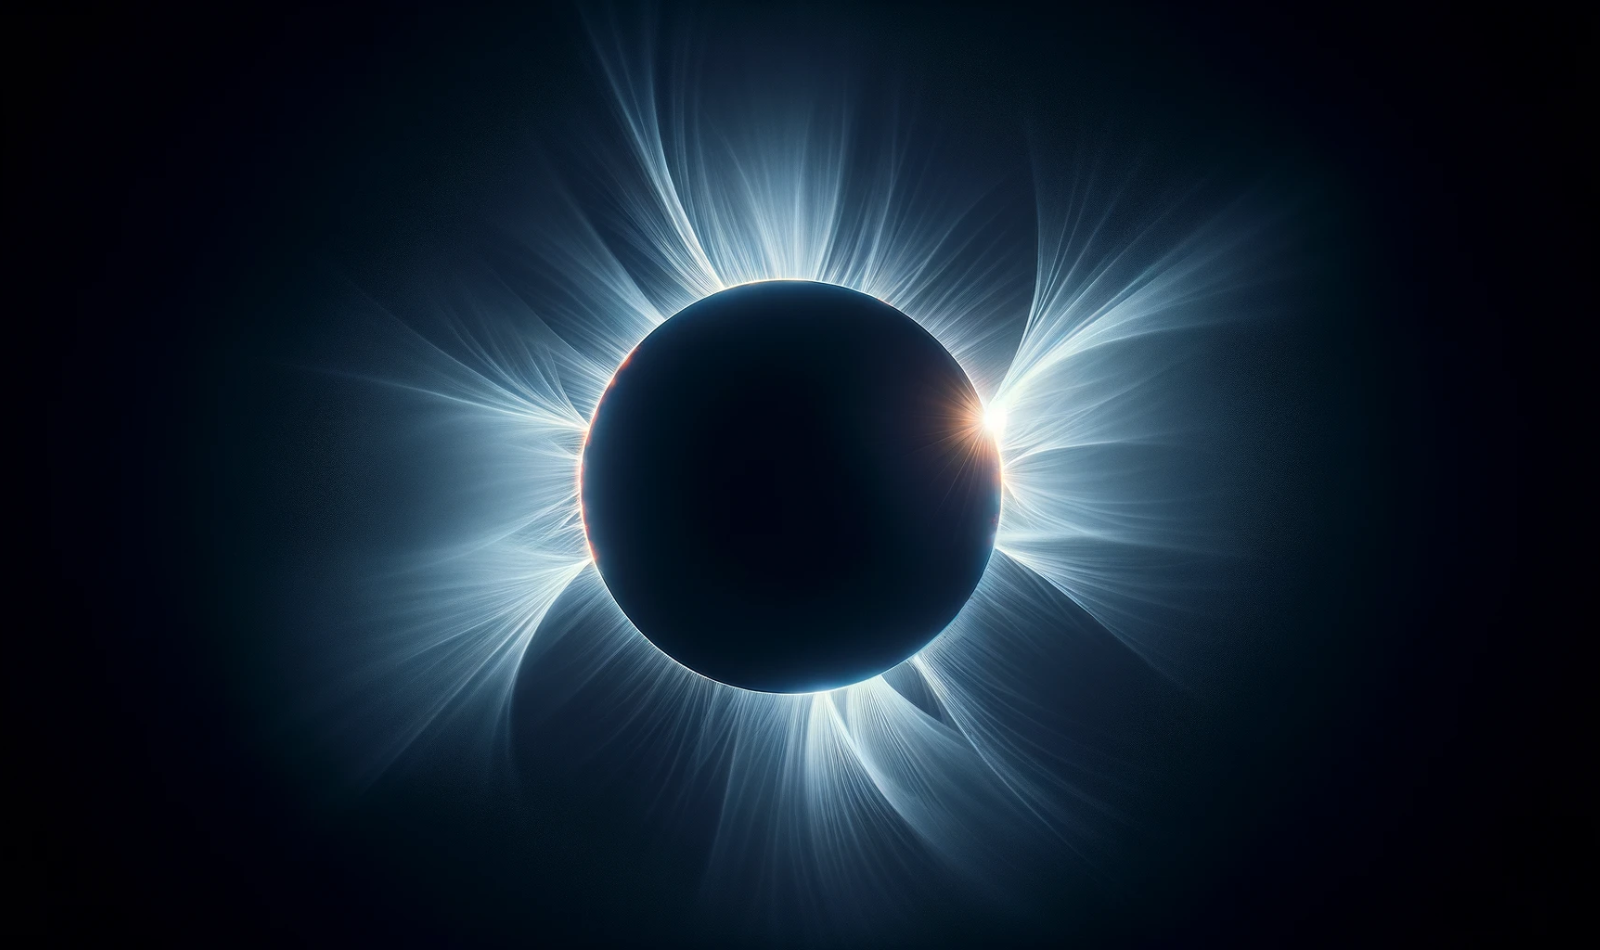 Simulated solar eclipse